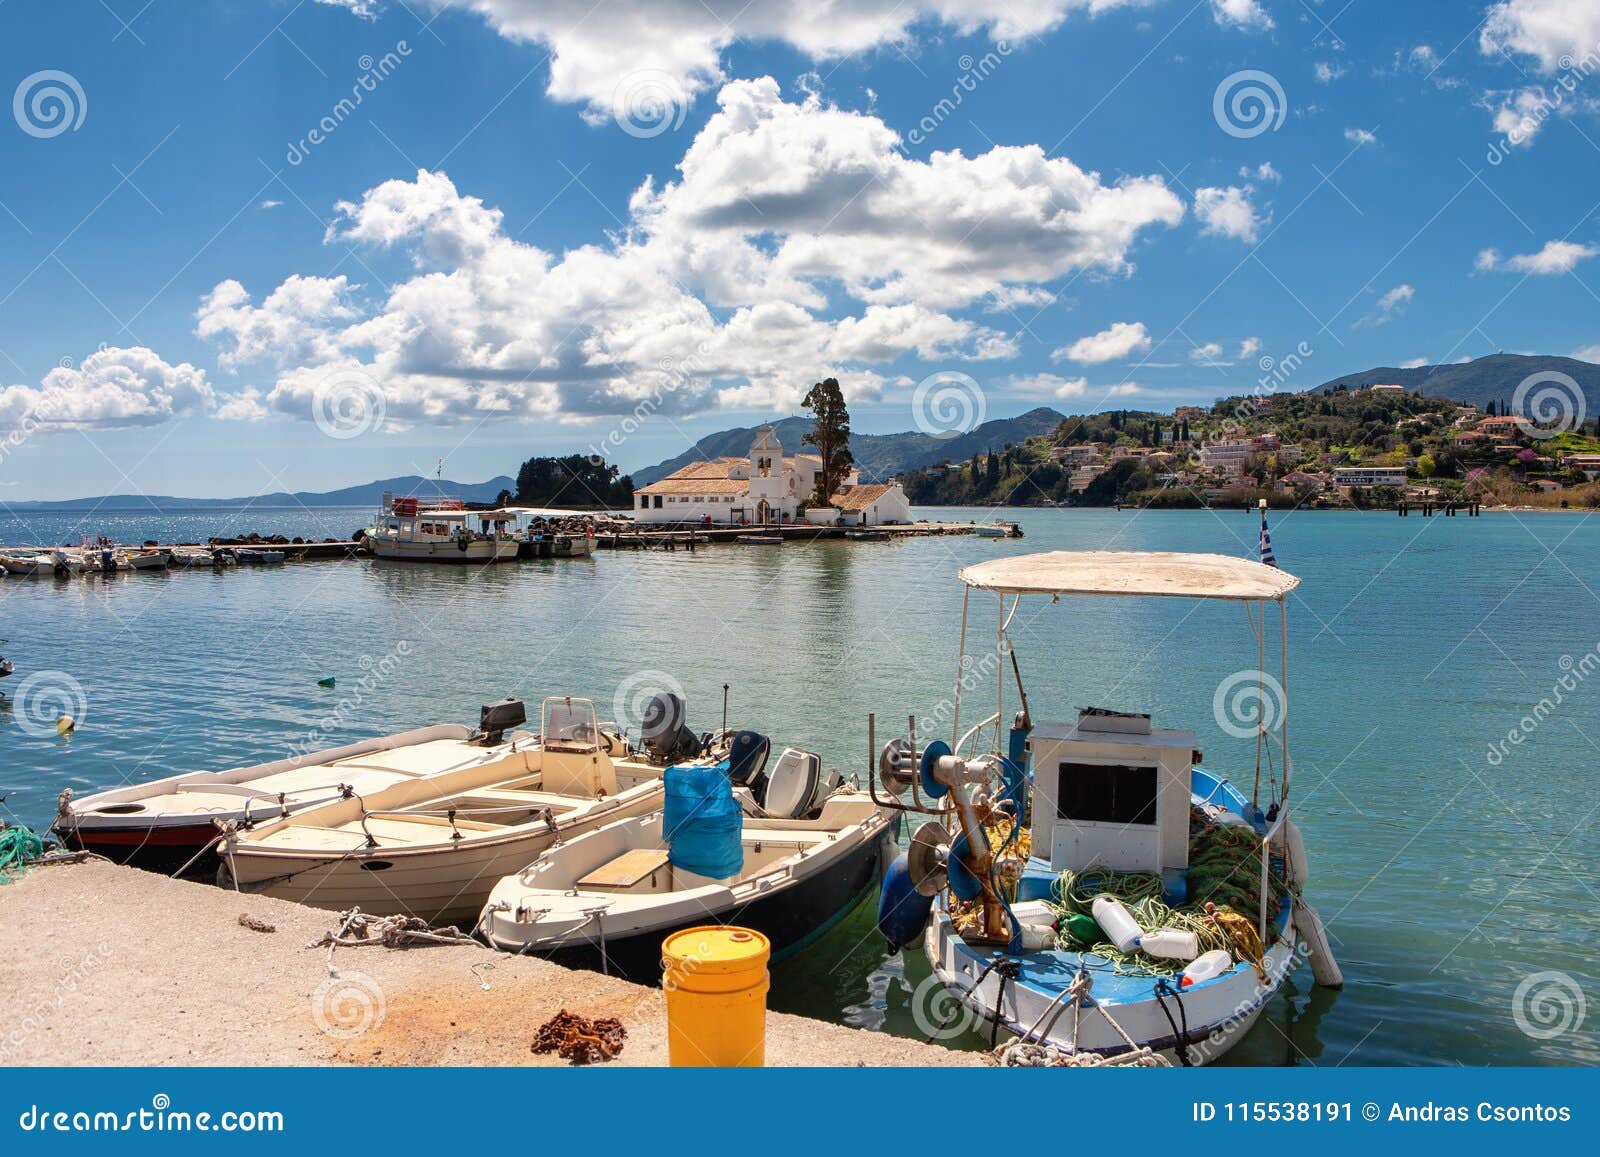 Fisher Boats and the Panagia Vlacherna Monastery Stock Image - Image of ...